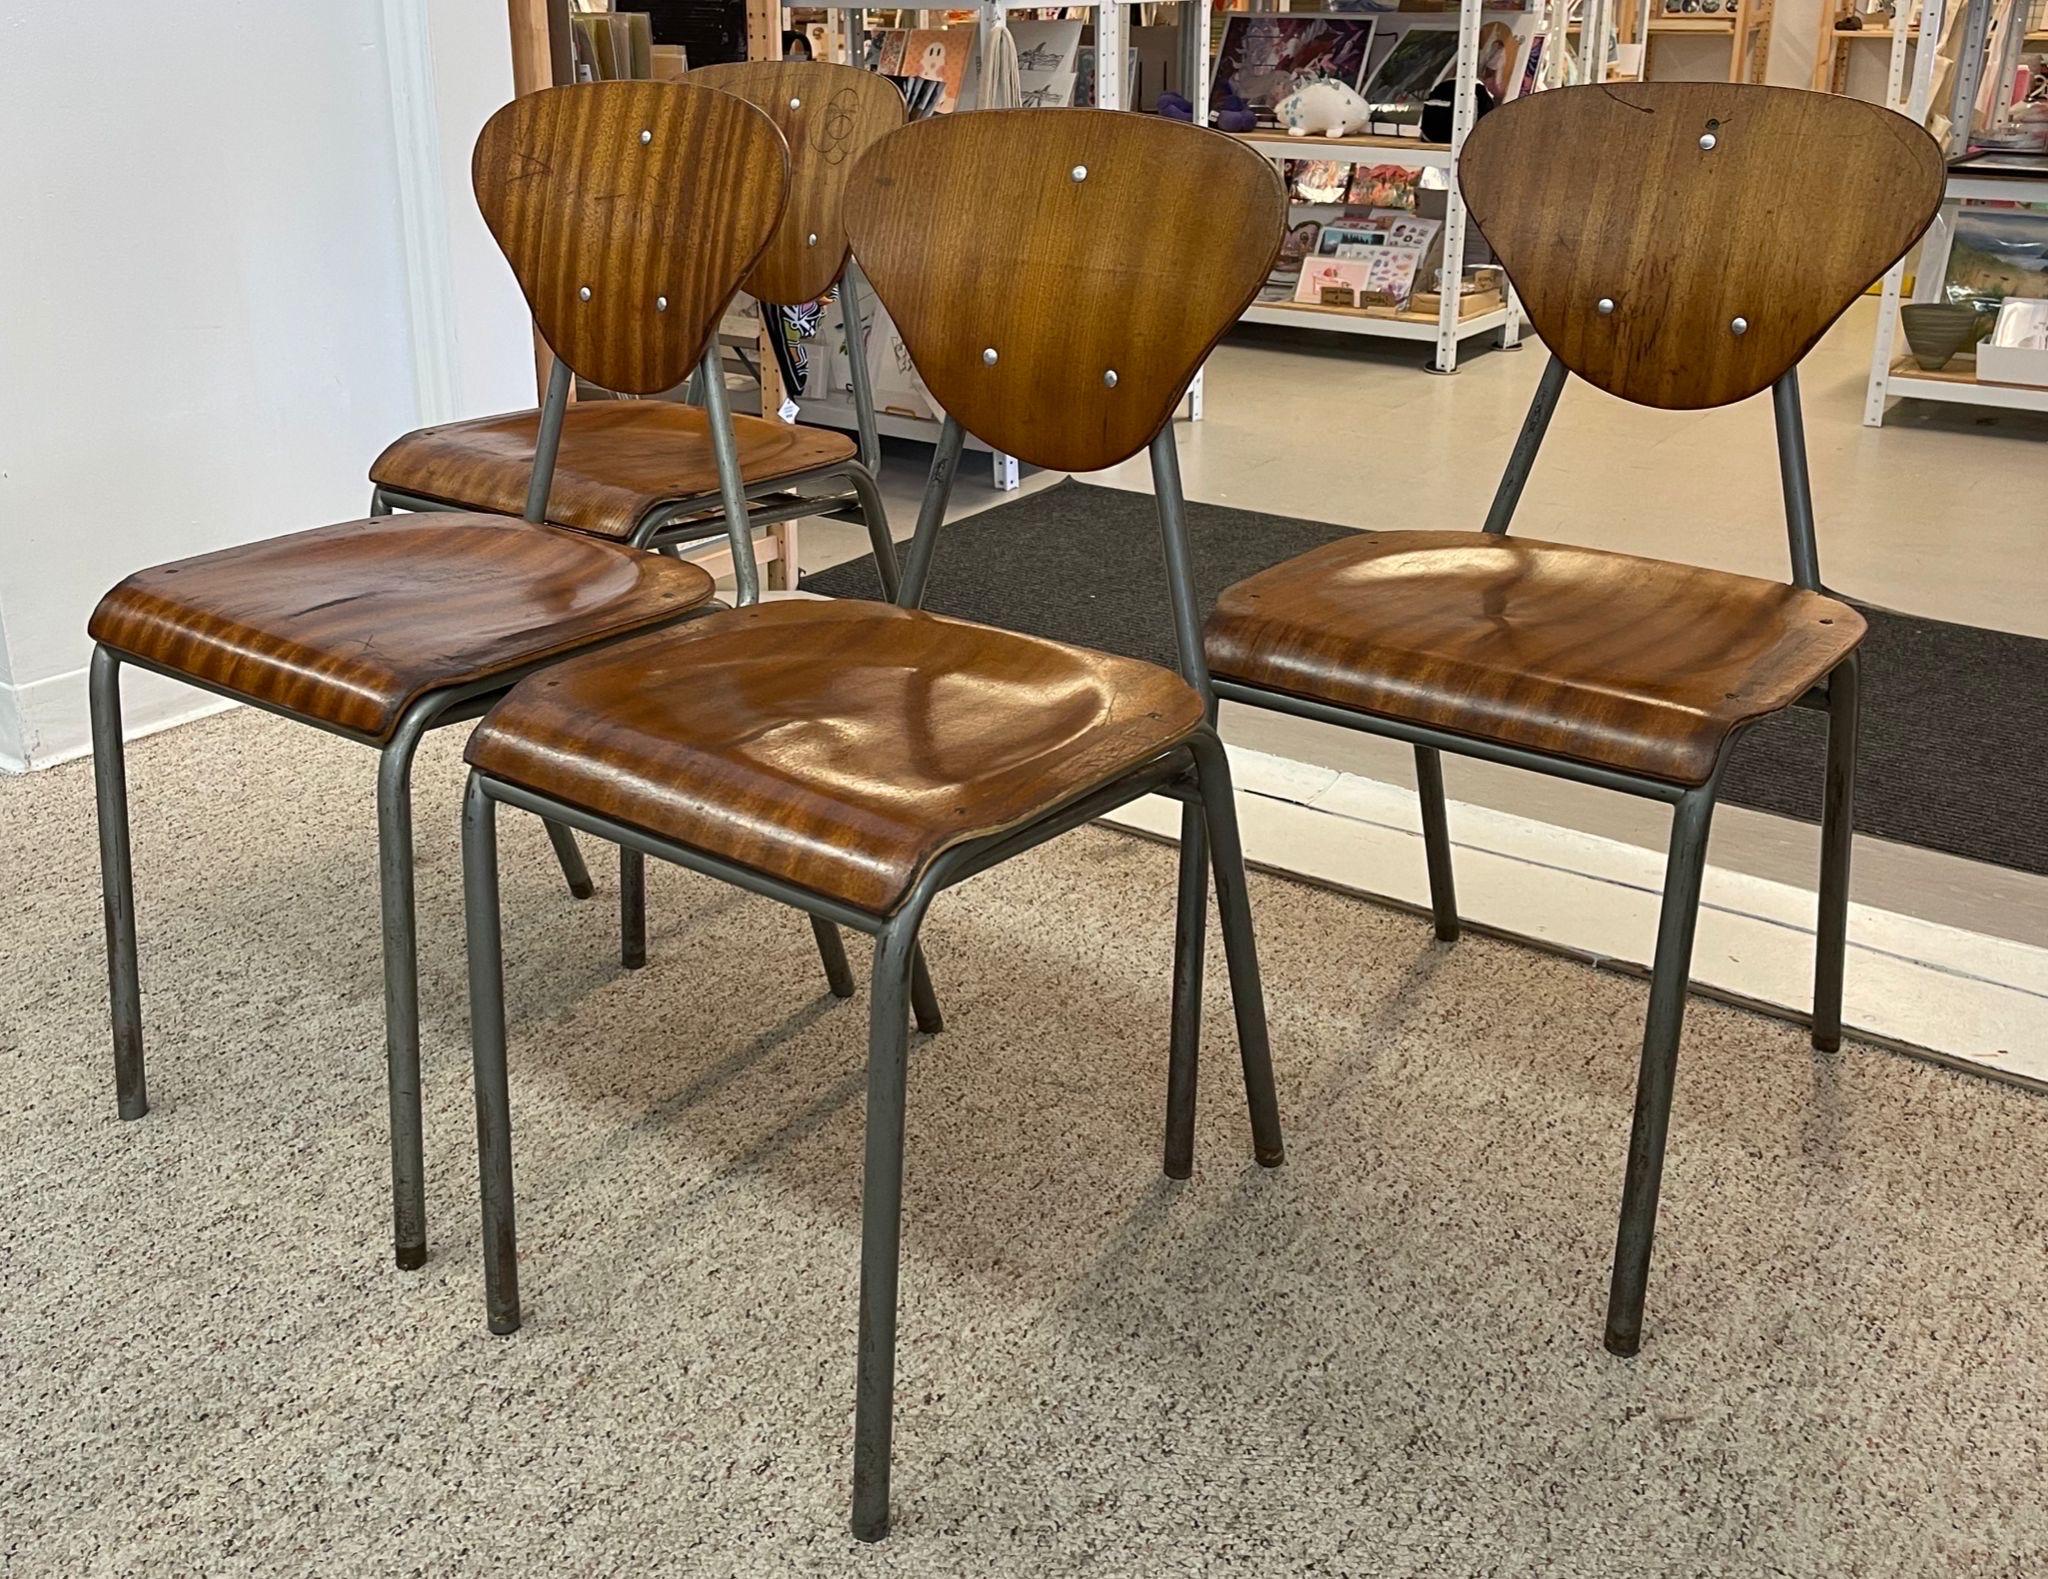 Mid-Century Modern Vintage Danish Modern Chairs With Metal Frame. Set of 4. For Sale